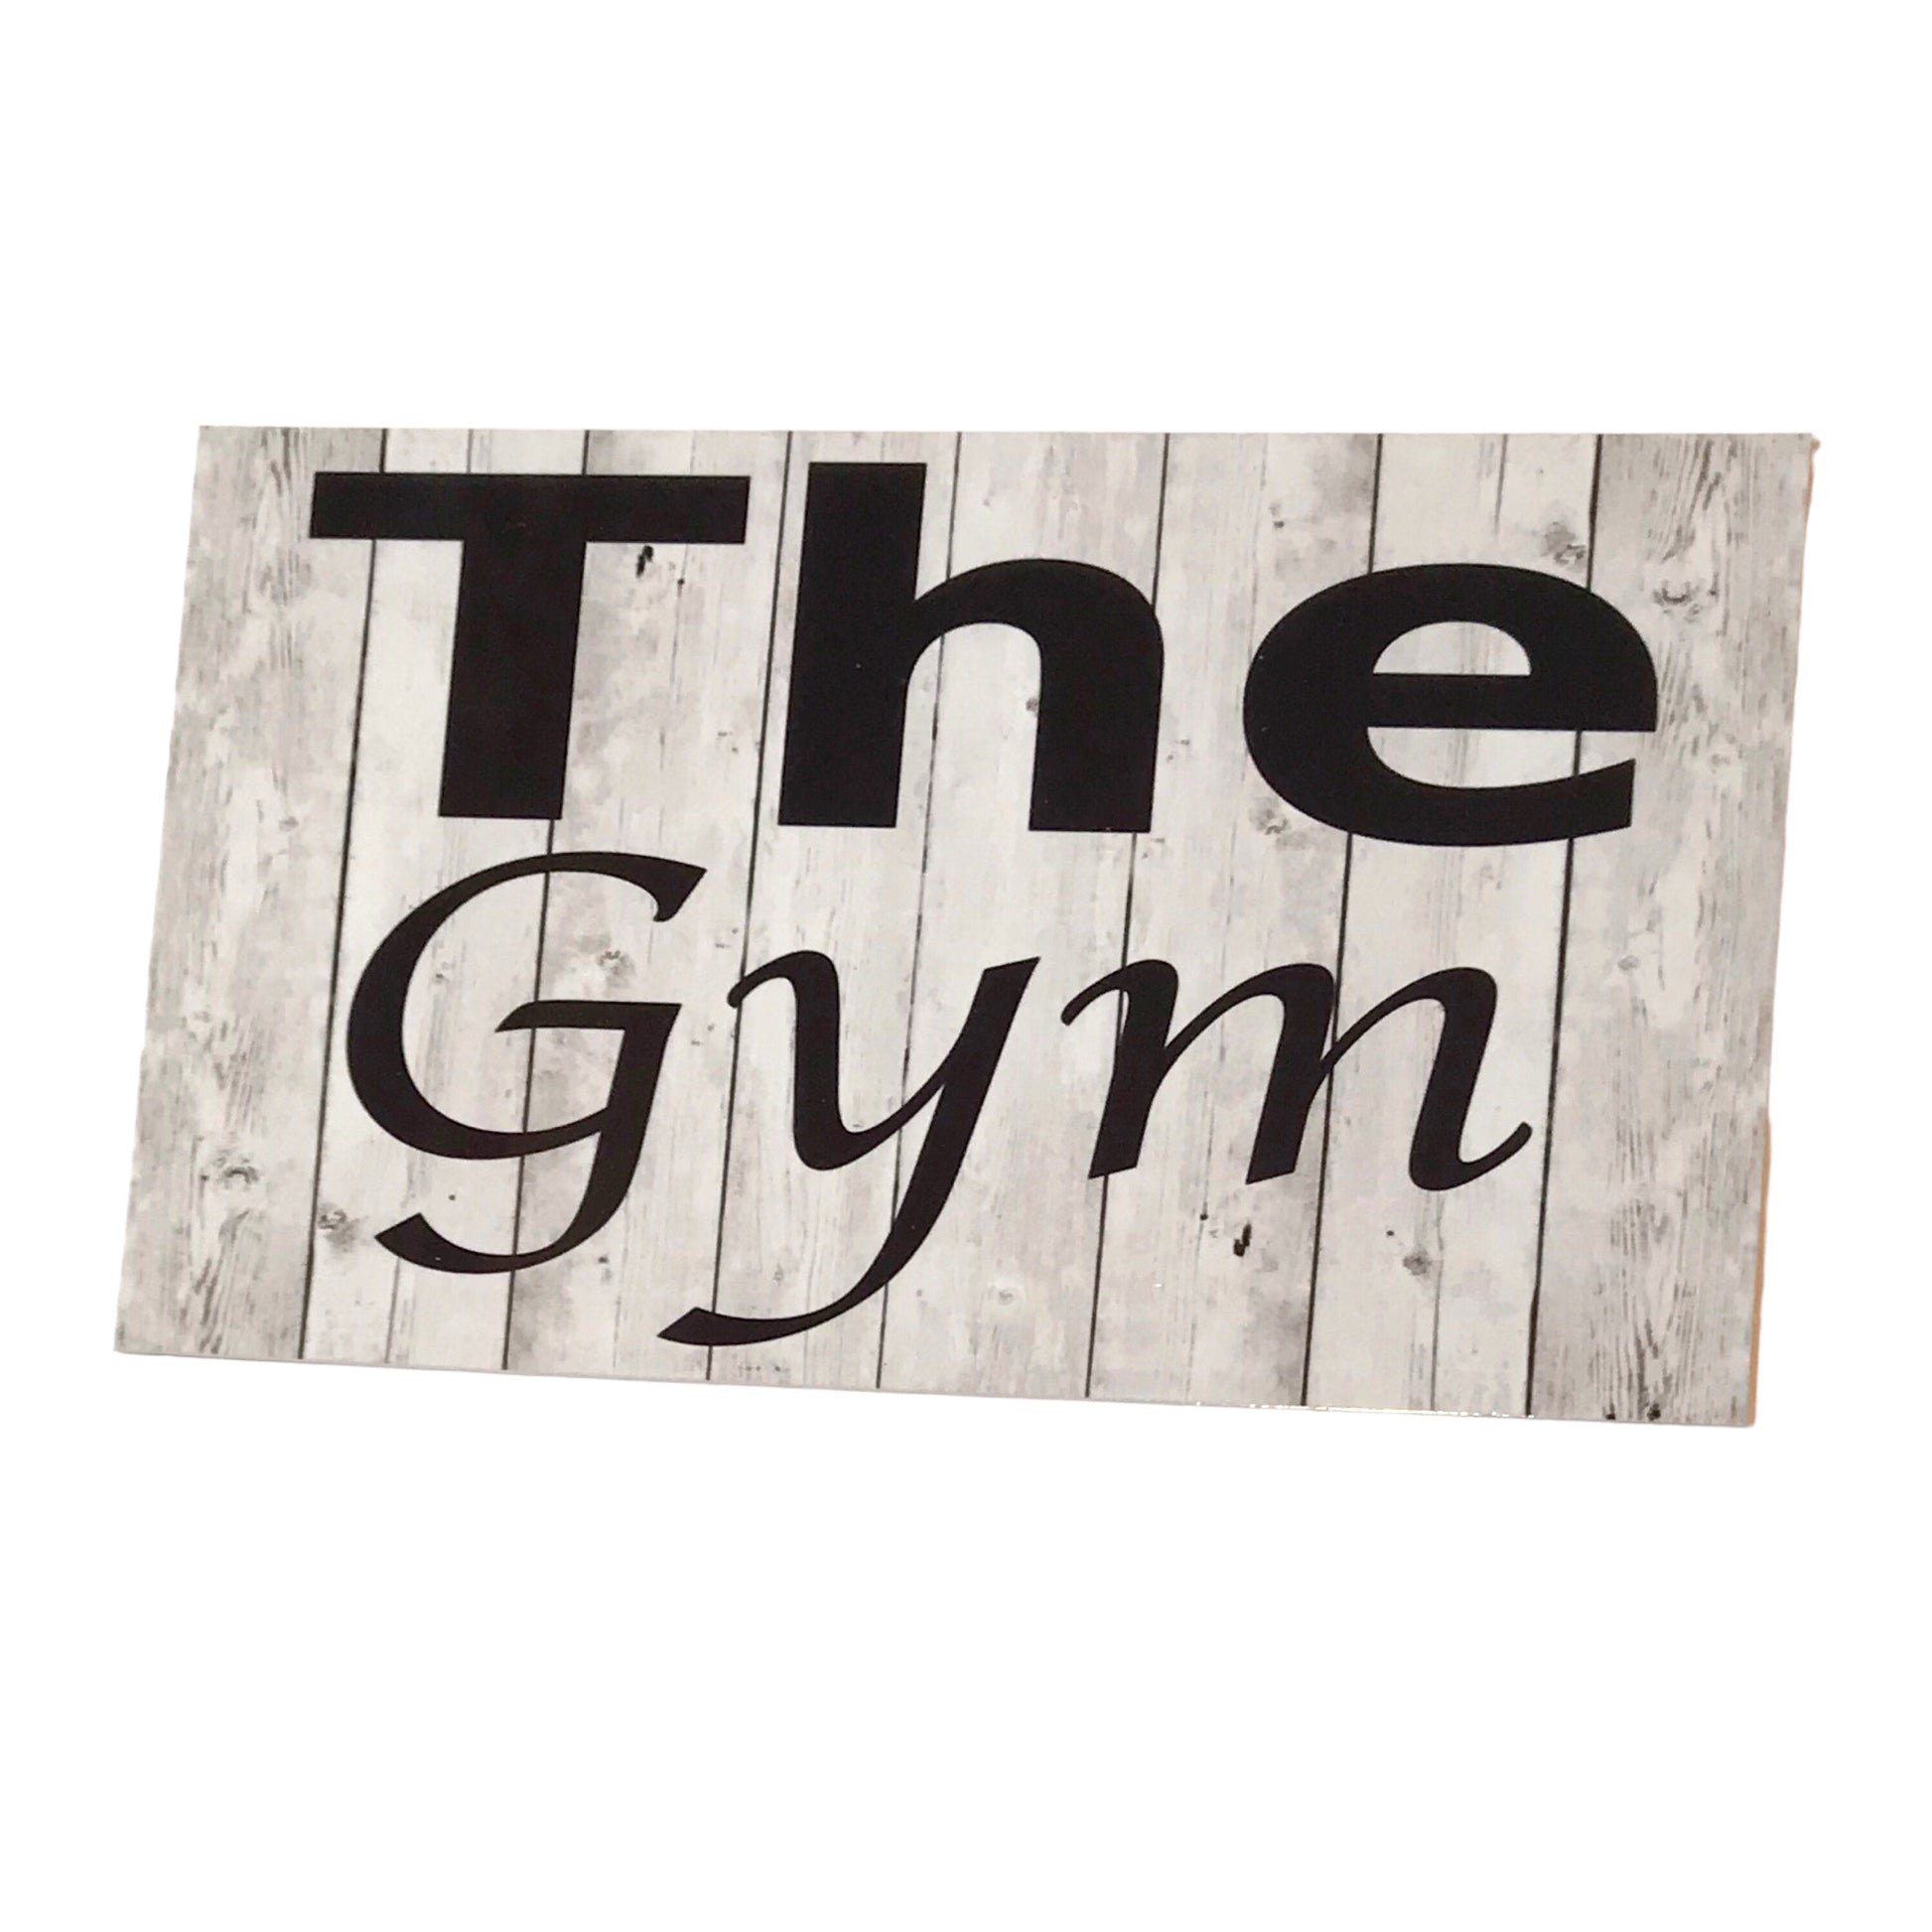 The Gym Door or Room Sign - The Renmy Store Homewares & Gifts 